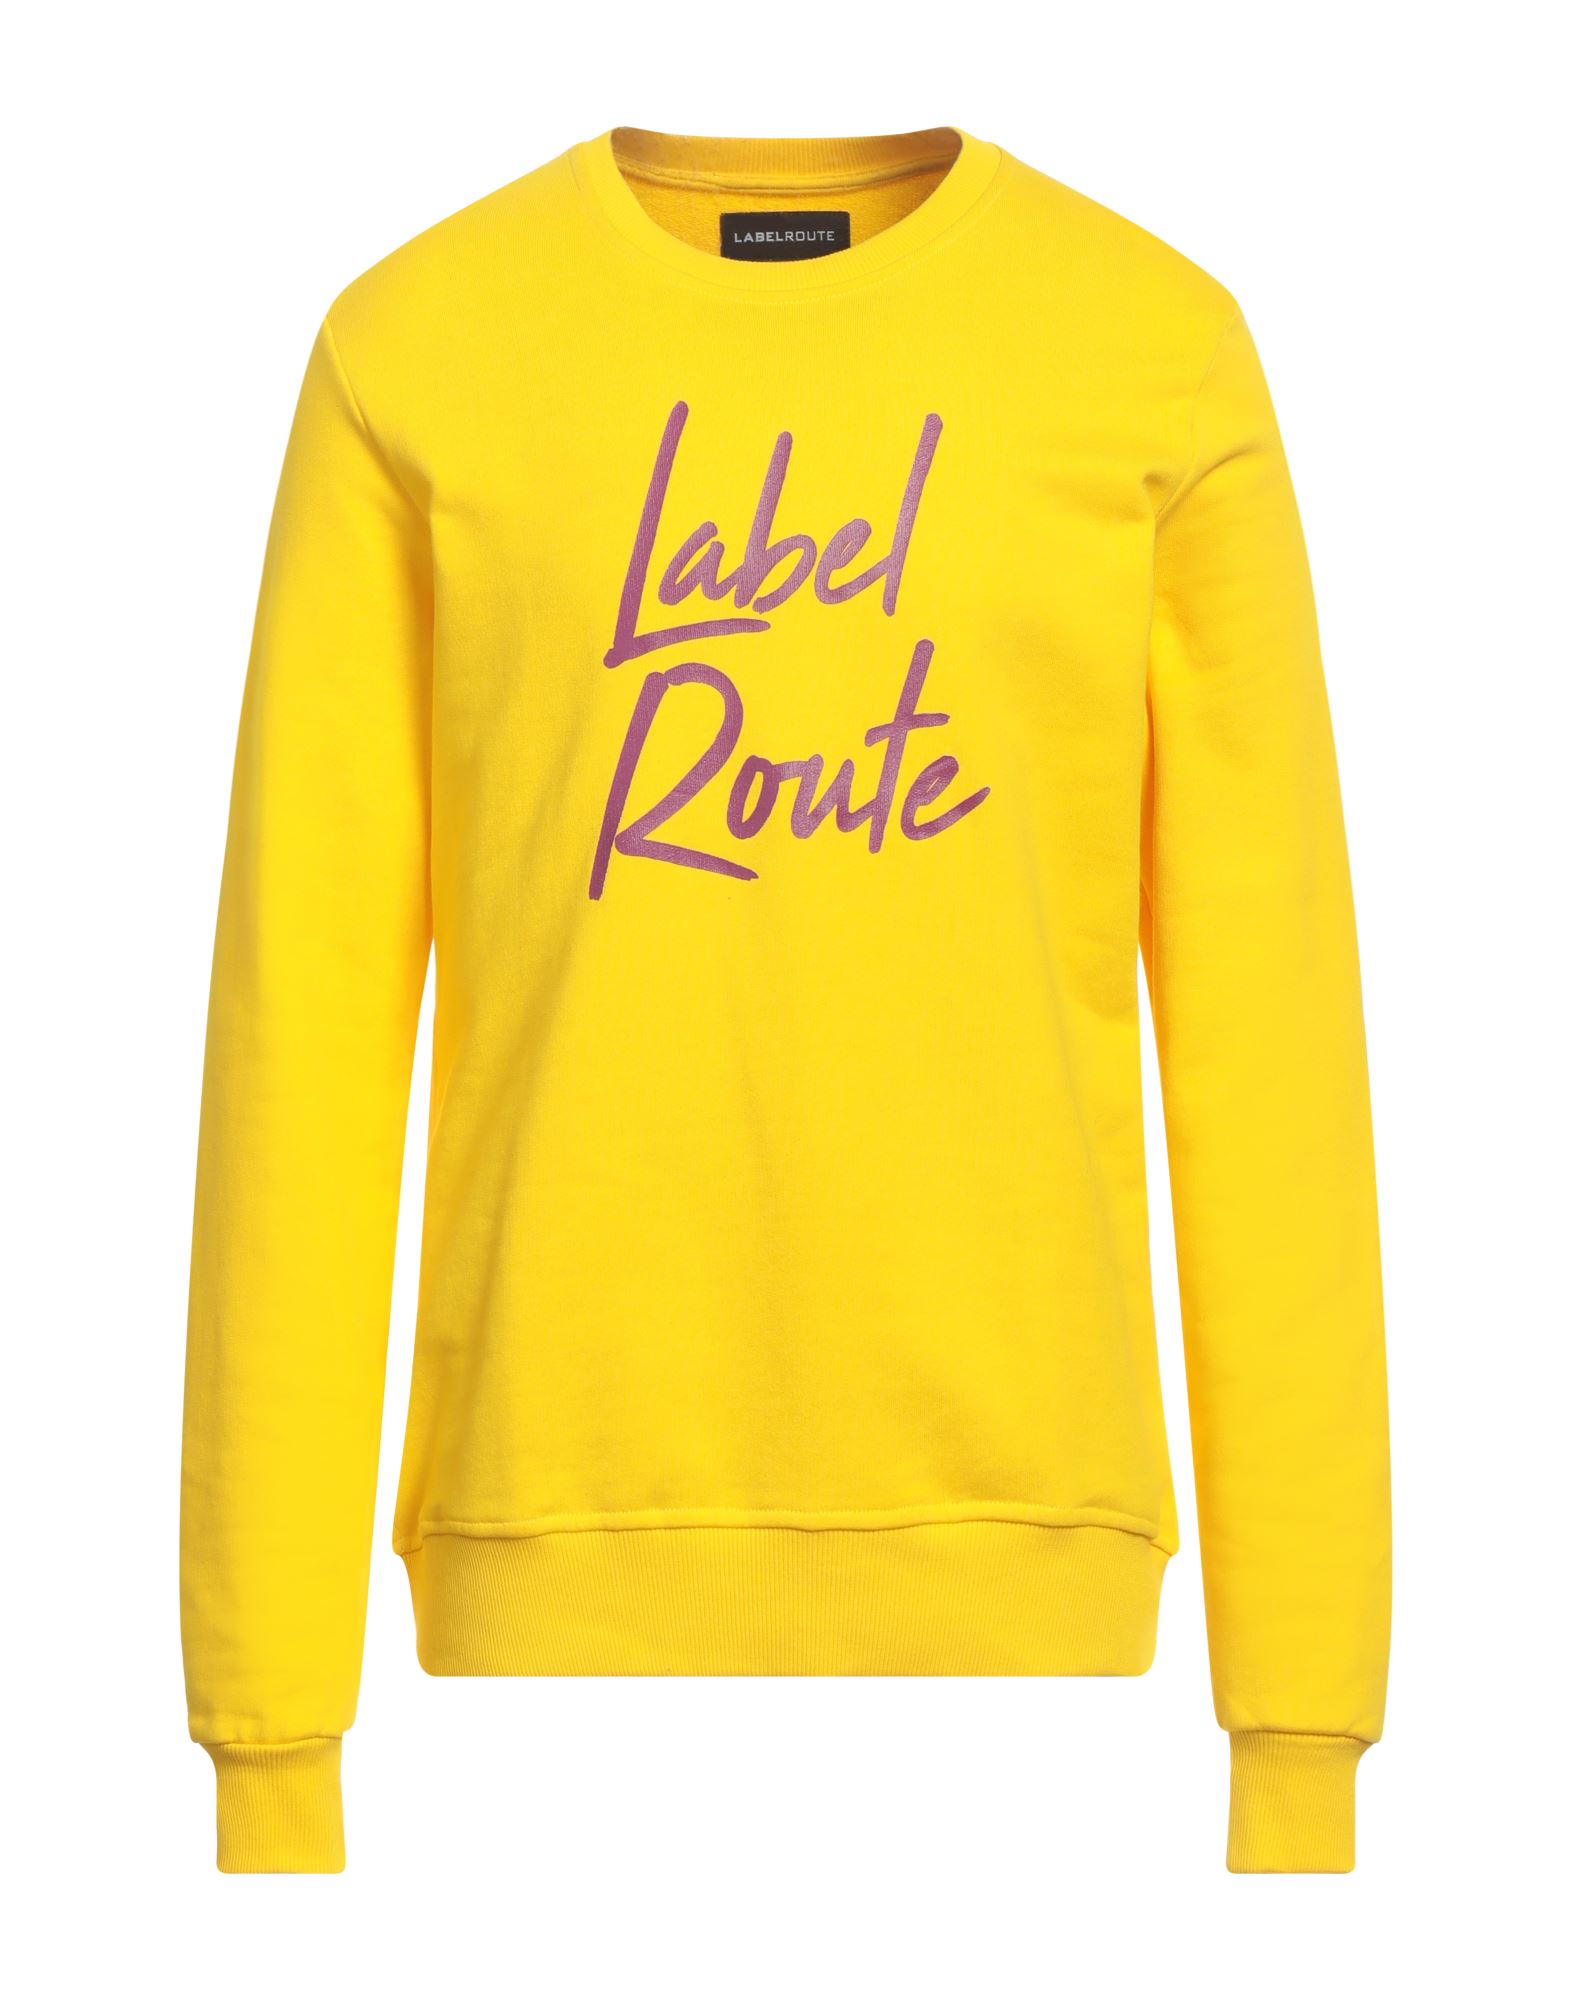 Labelroute Sweatshirts In Yellow